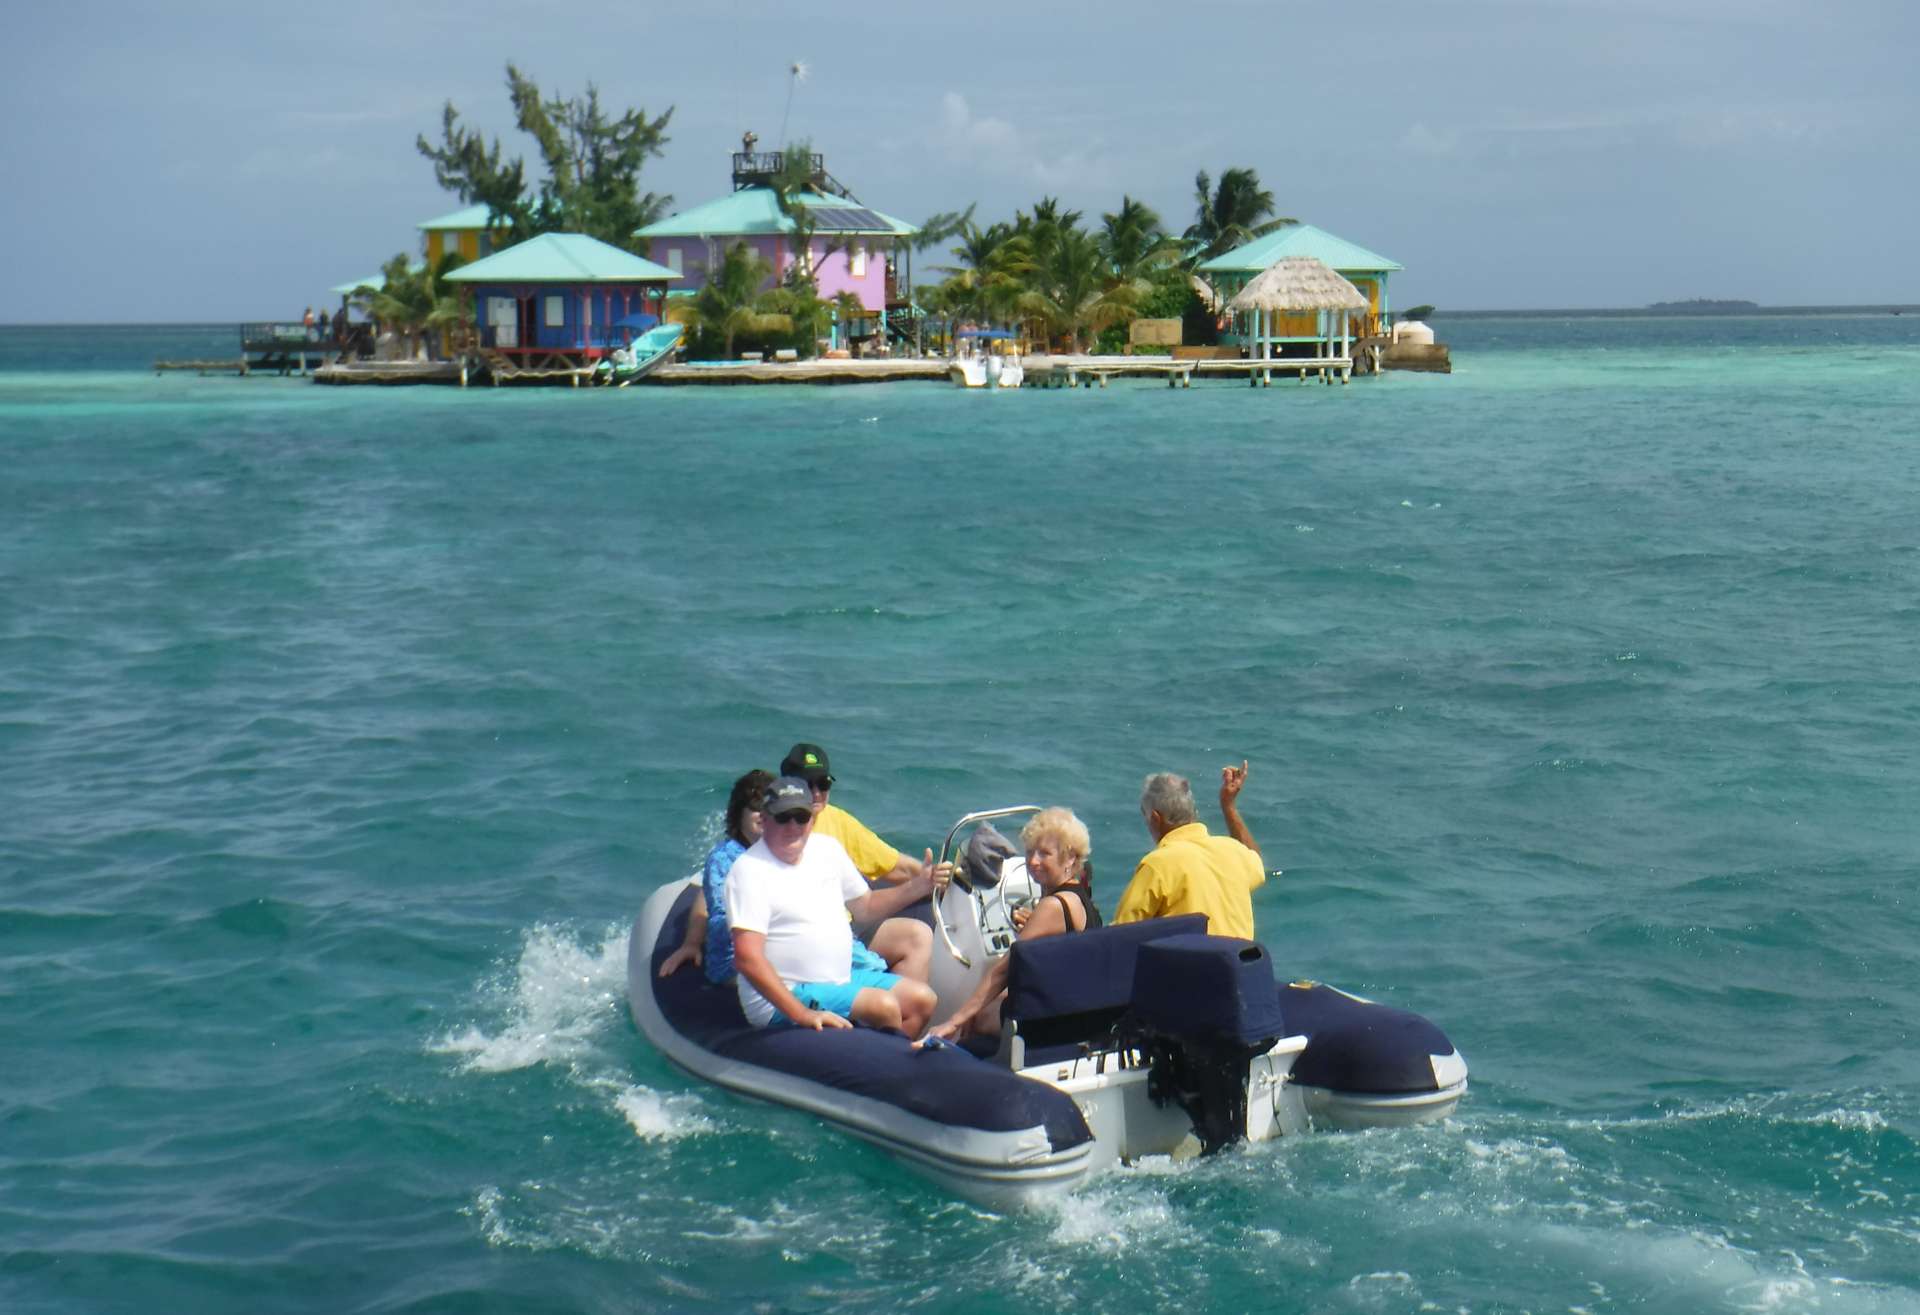 dreaming on - Yacht Charter Caribbean & Boat hire in Central america, Belize 5